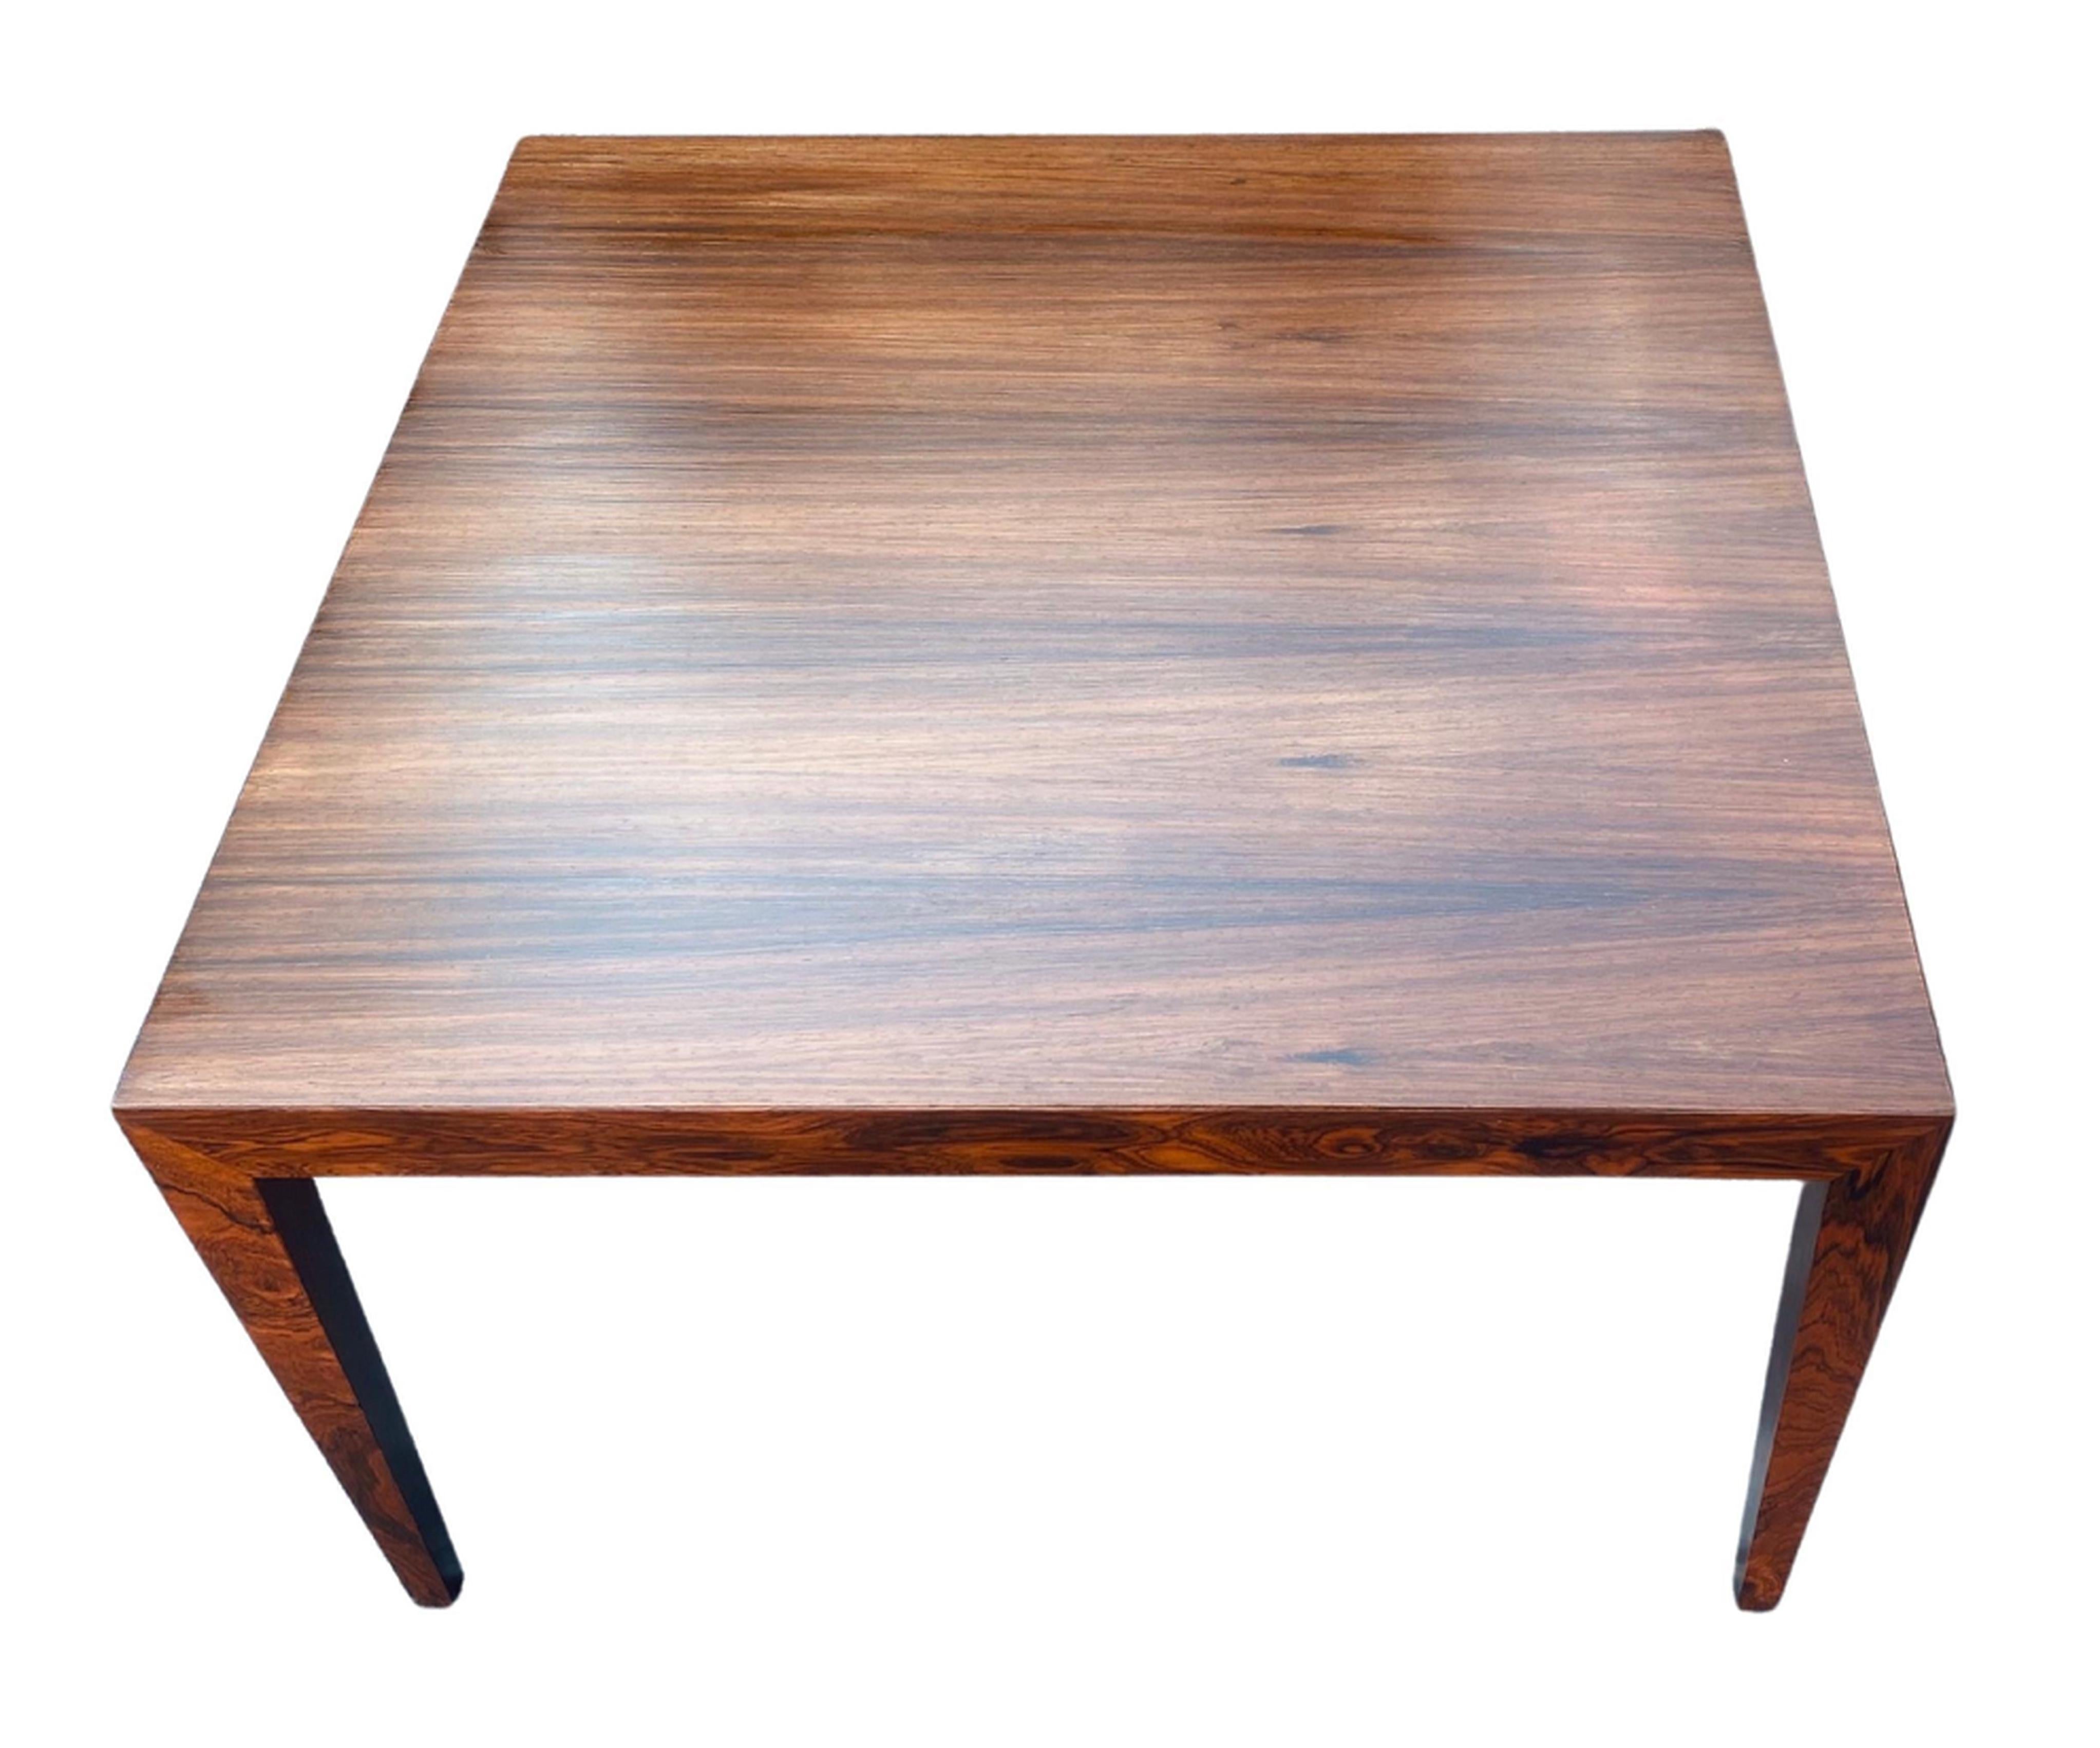 Coffee table in rosewood by legendary Danish designer Severin Hansen.

Especially the corner joints made these coffee tables famous and coveted. 

Produced by Haslev Møbelfabrikk in the 1960s.

Gently and expertly refinished to highest